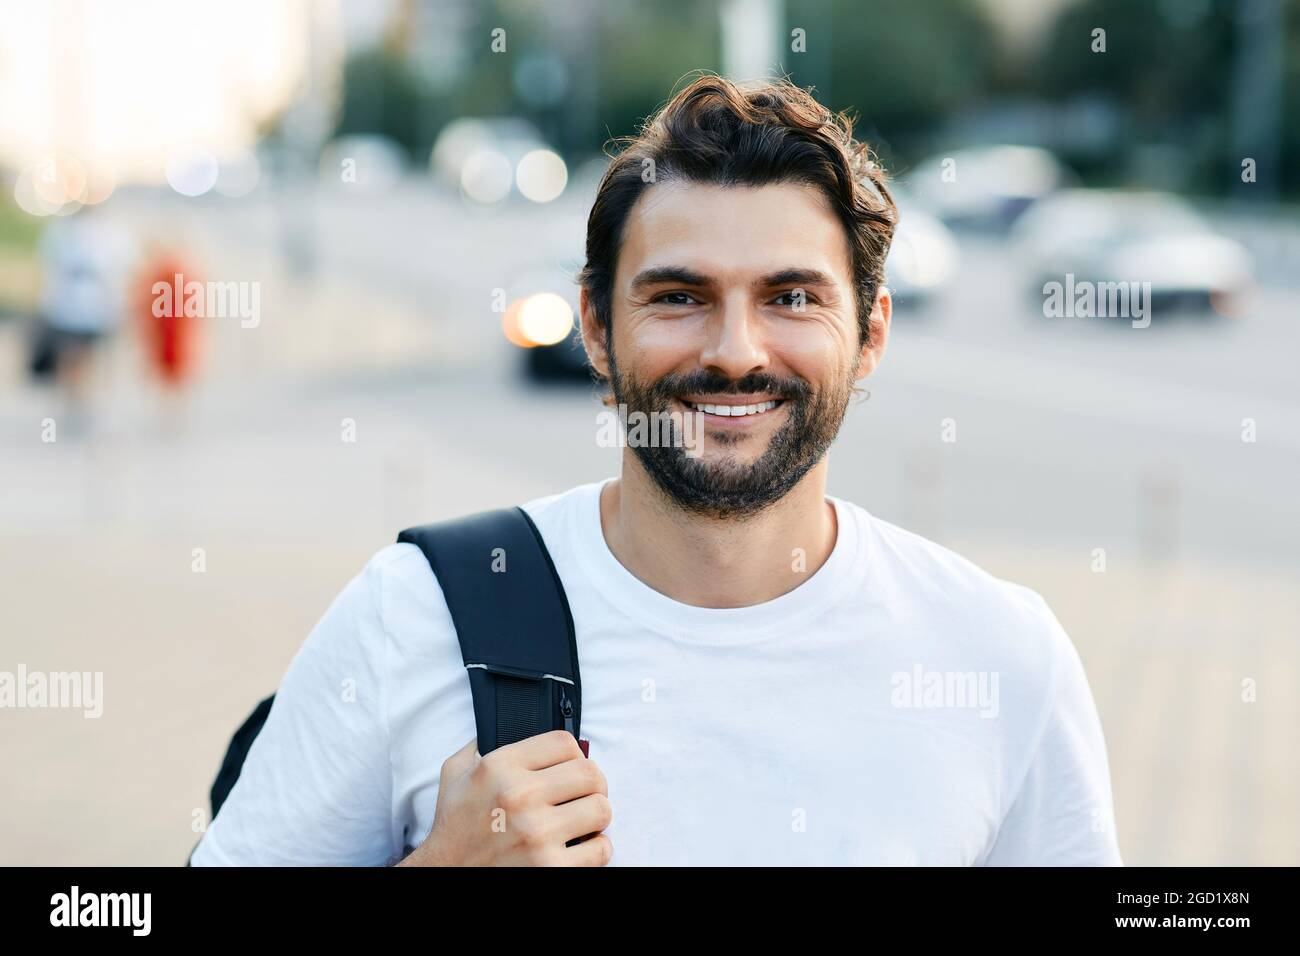 Portrait of a handsome man with a white toothy smile on a city street holding a backpack Stock Photo